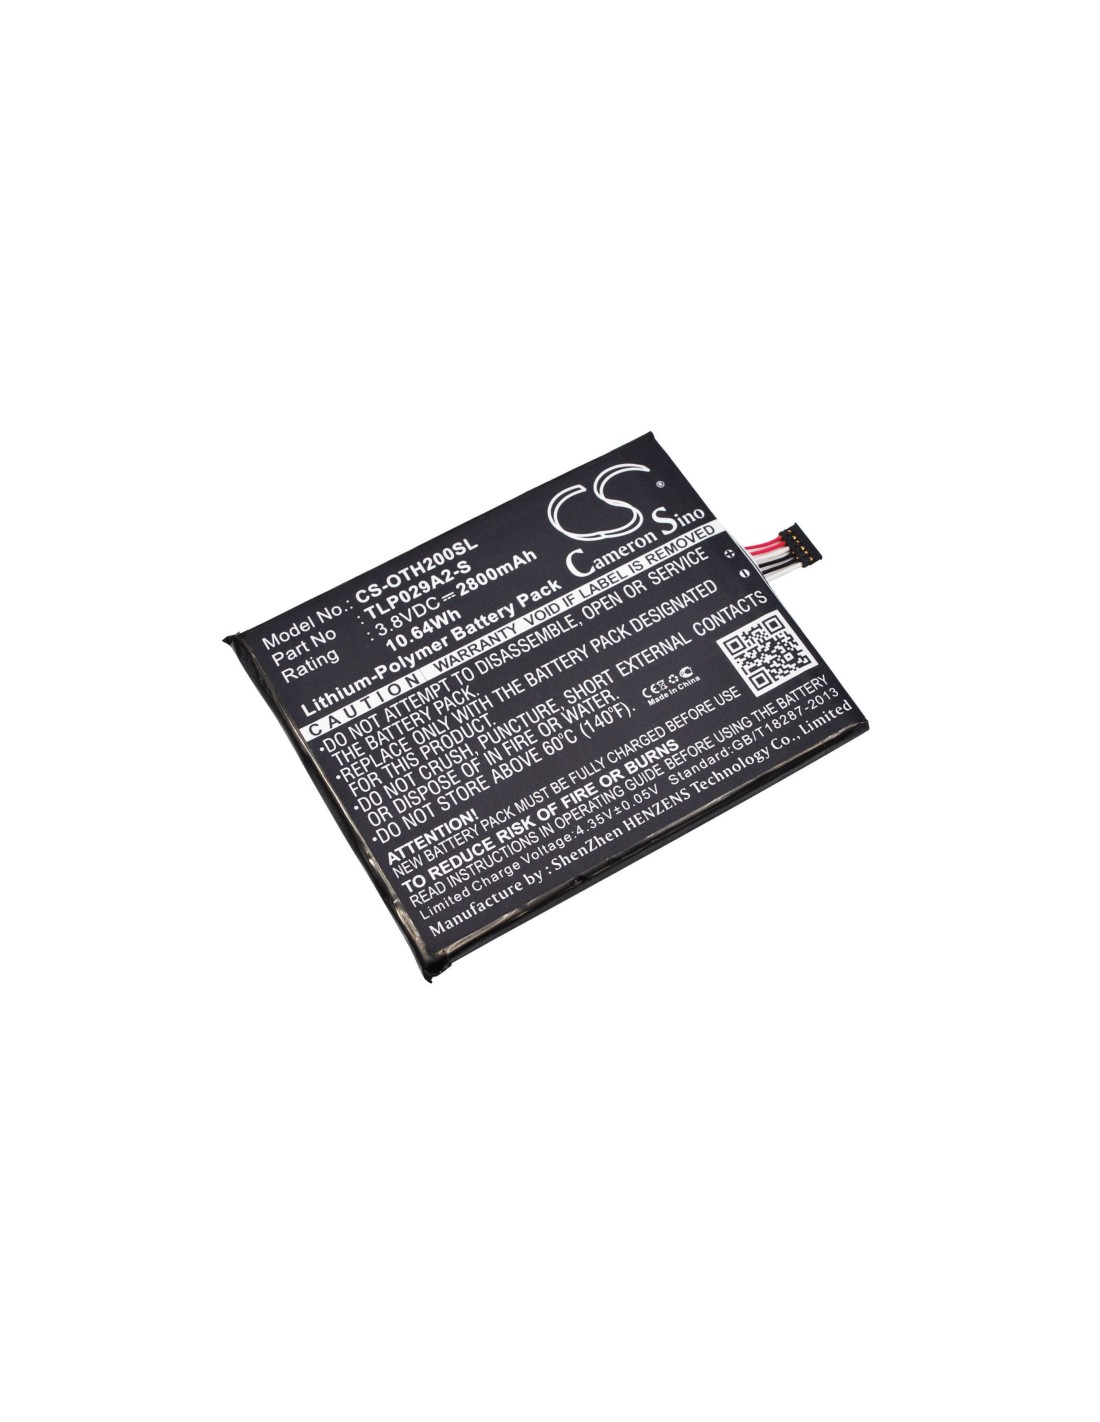 Battery for Alcatel One Touch Idol 3 5.5, One Touch Pixi 3 5.5, One Touch Pixi 3 5.5 3G 3.8V, 2800mAh - 10.64Wh